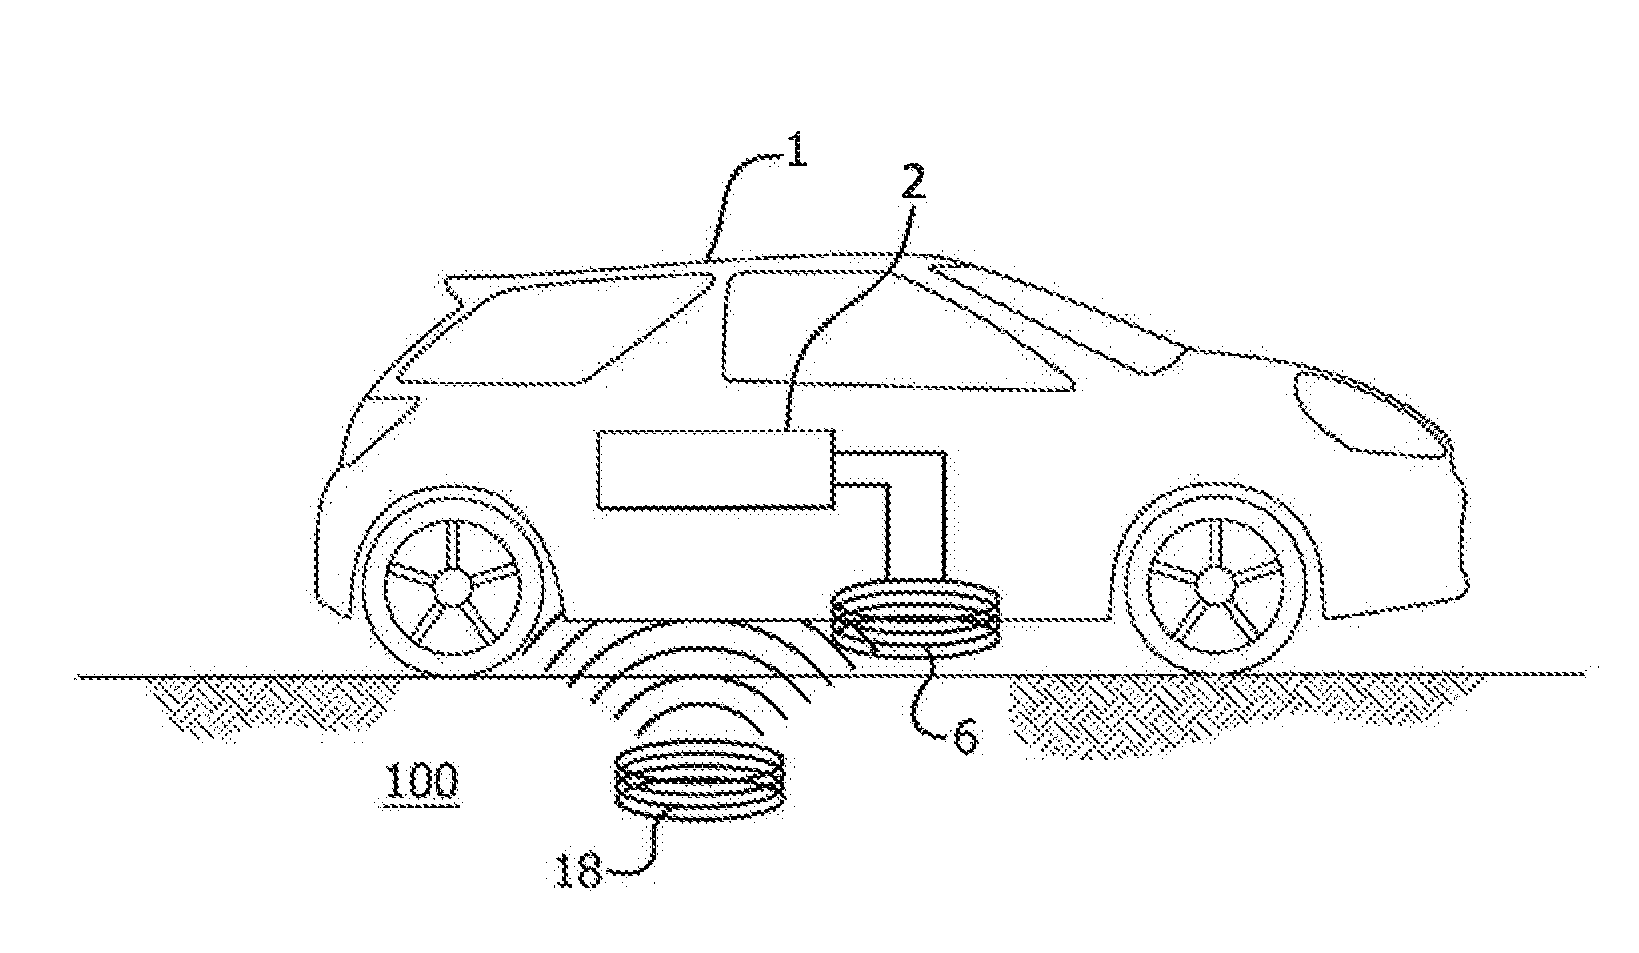 Supercapacitor vehicle and roadway system